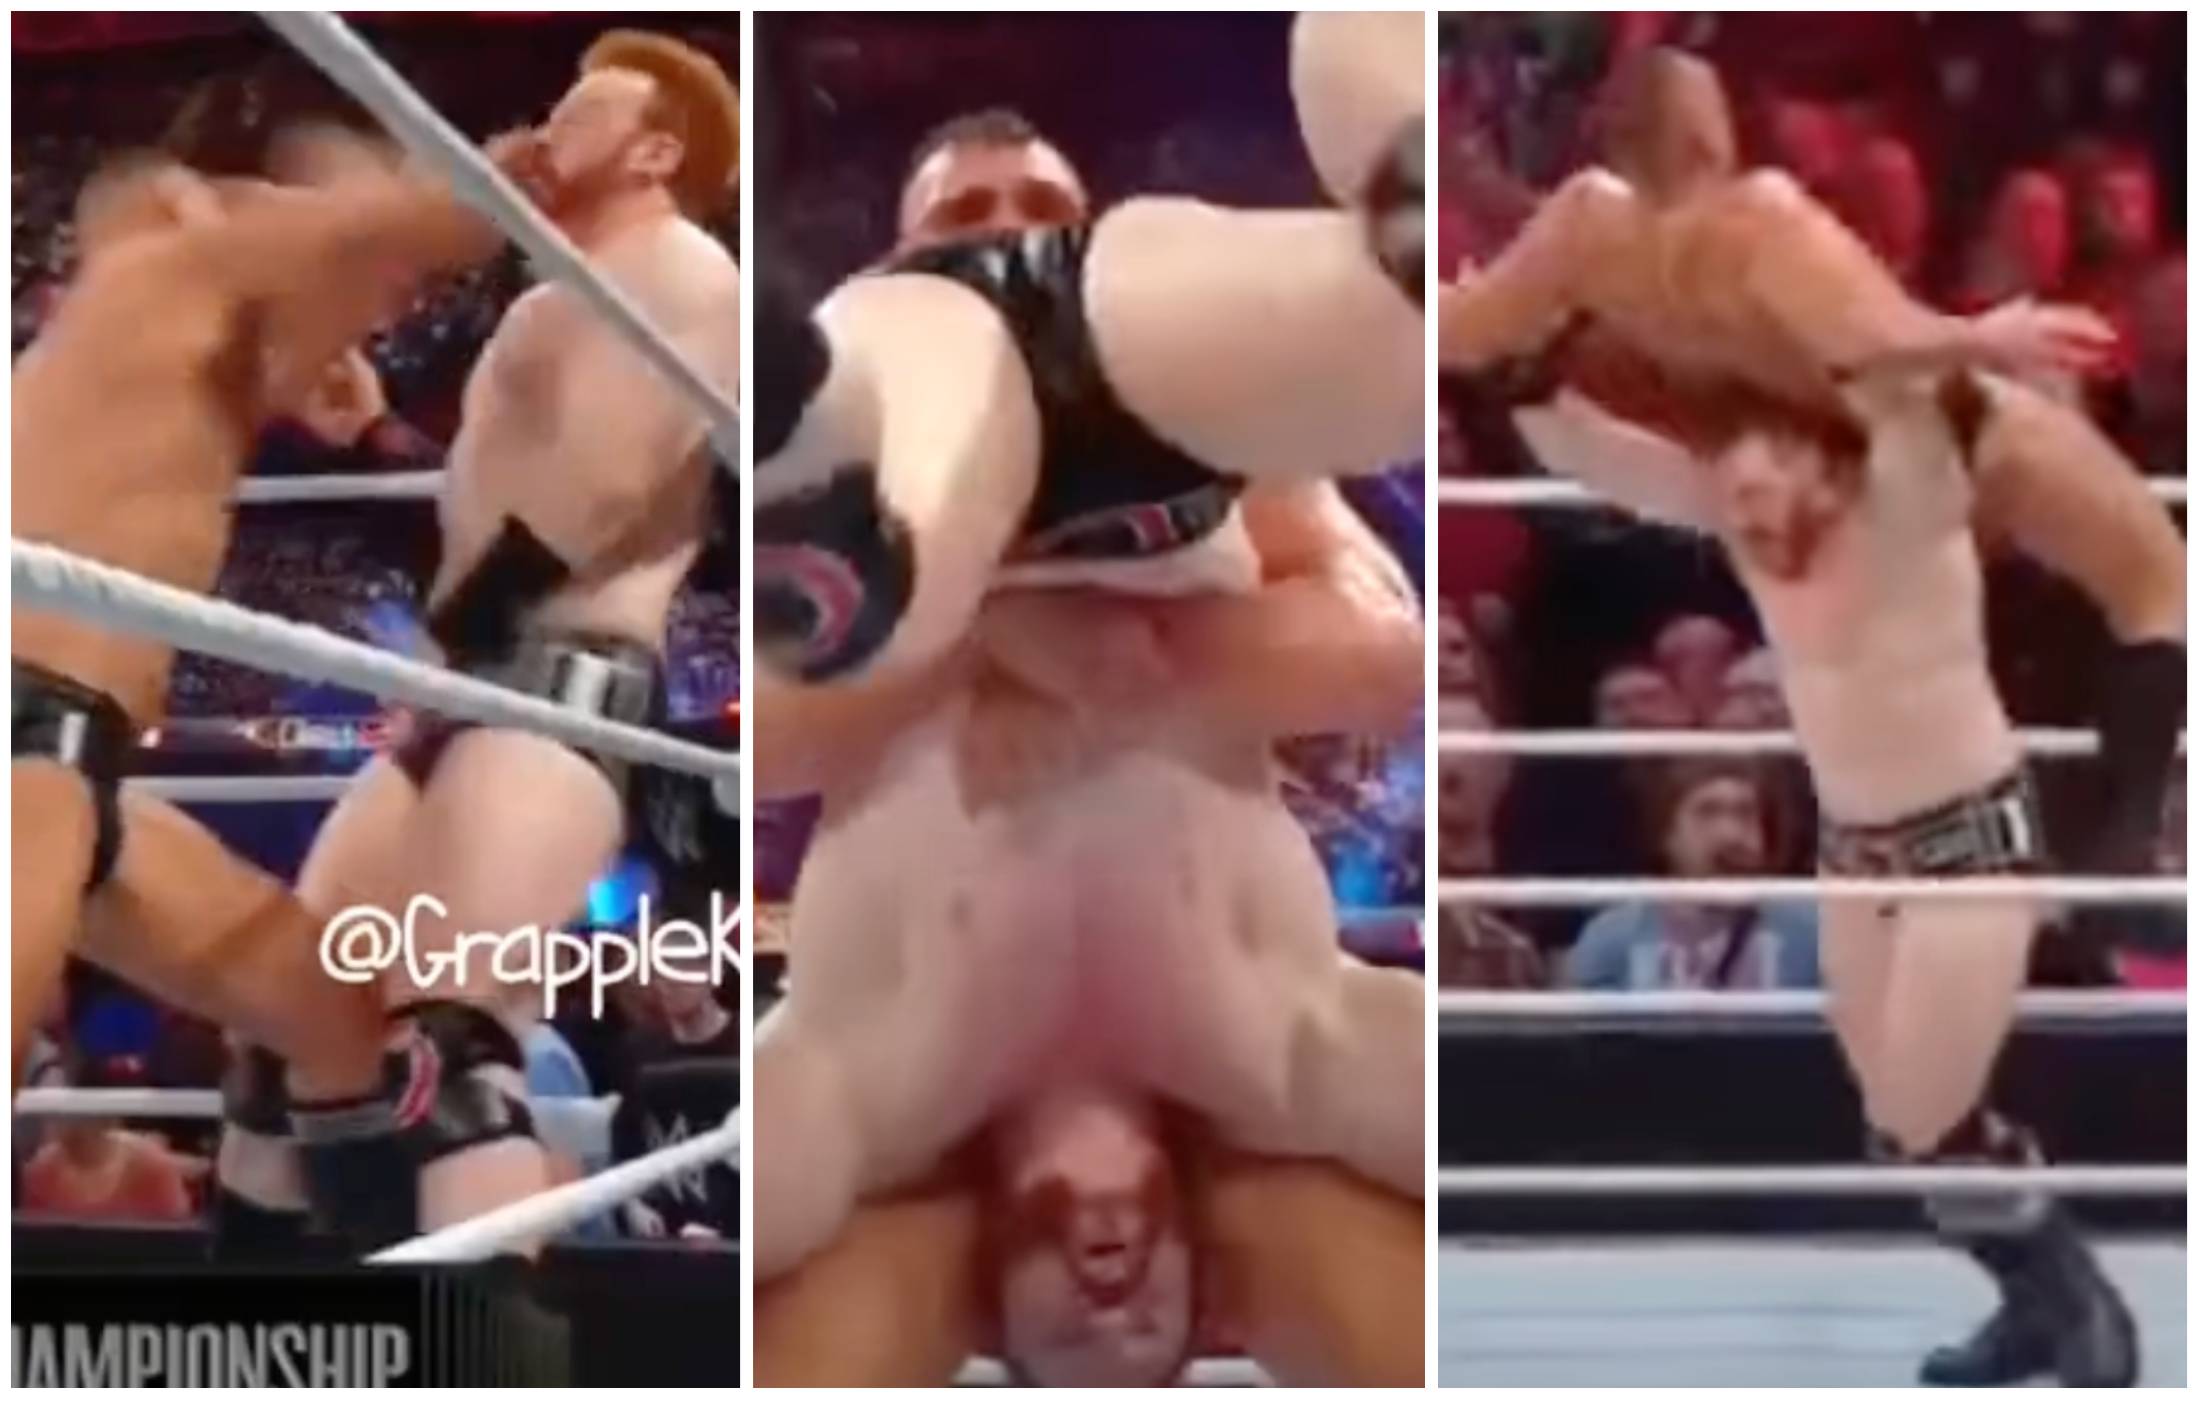 Gunther v Sheamus was one of WWE's best-ever matches